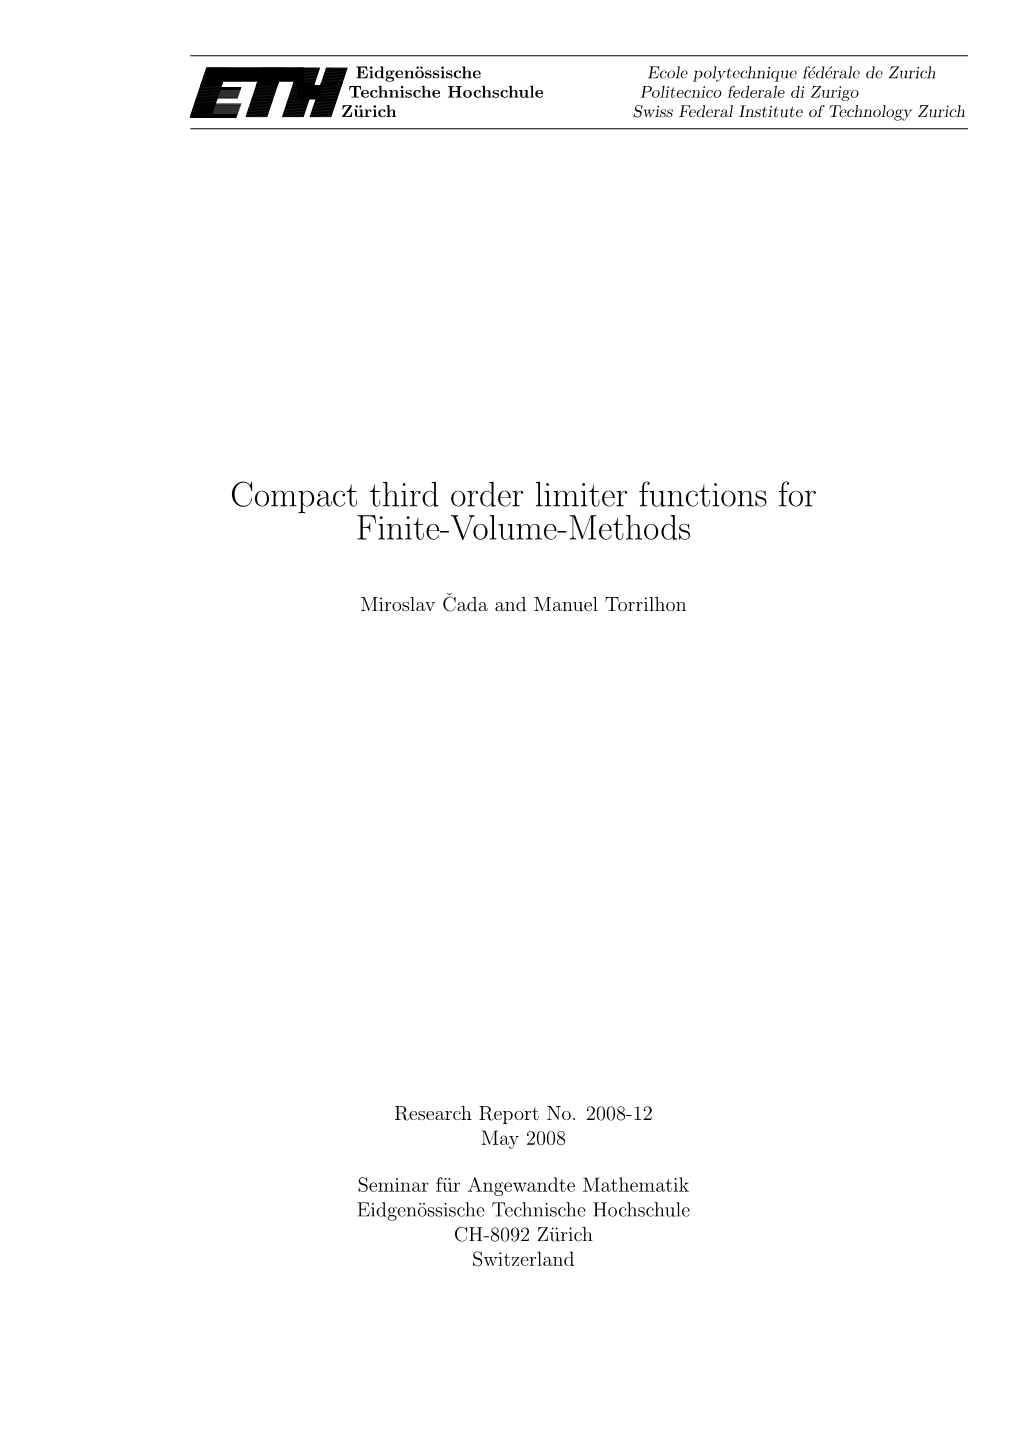 Compact Third Order Limiter Functions for Finite-Volume-Methods